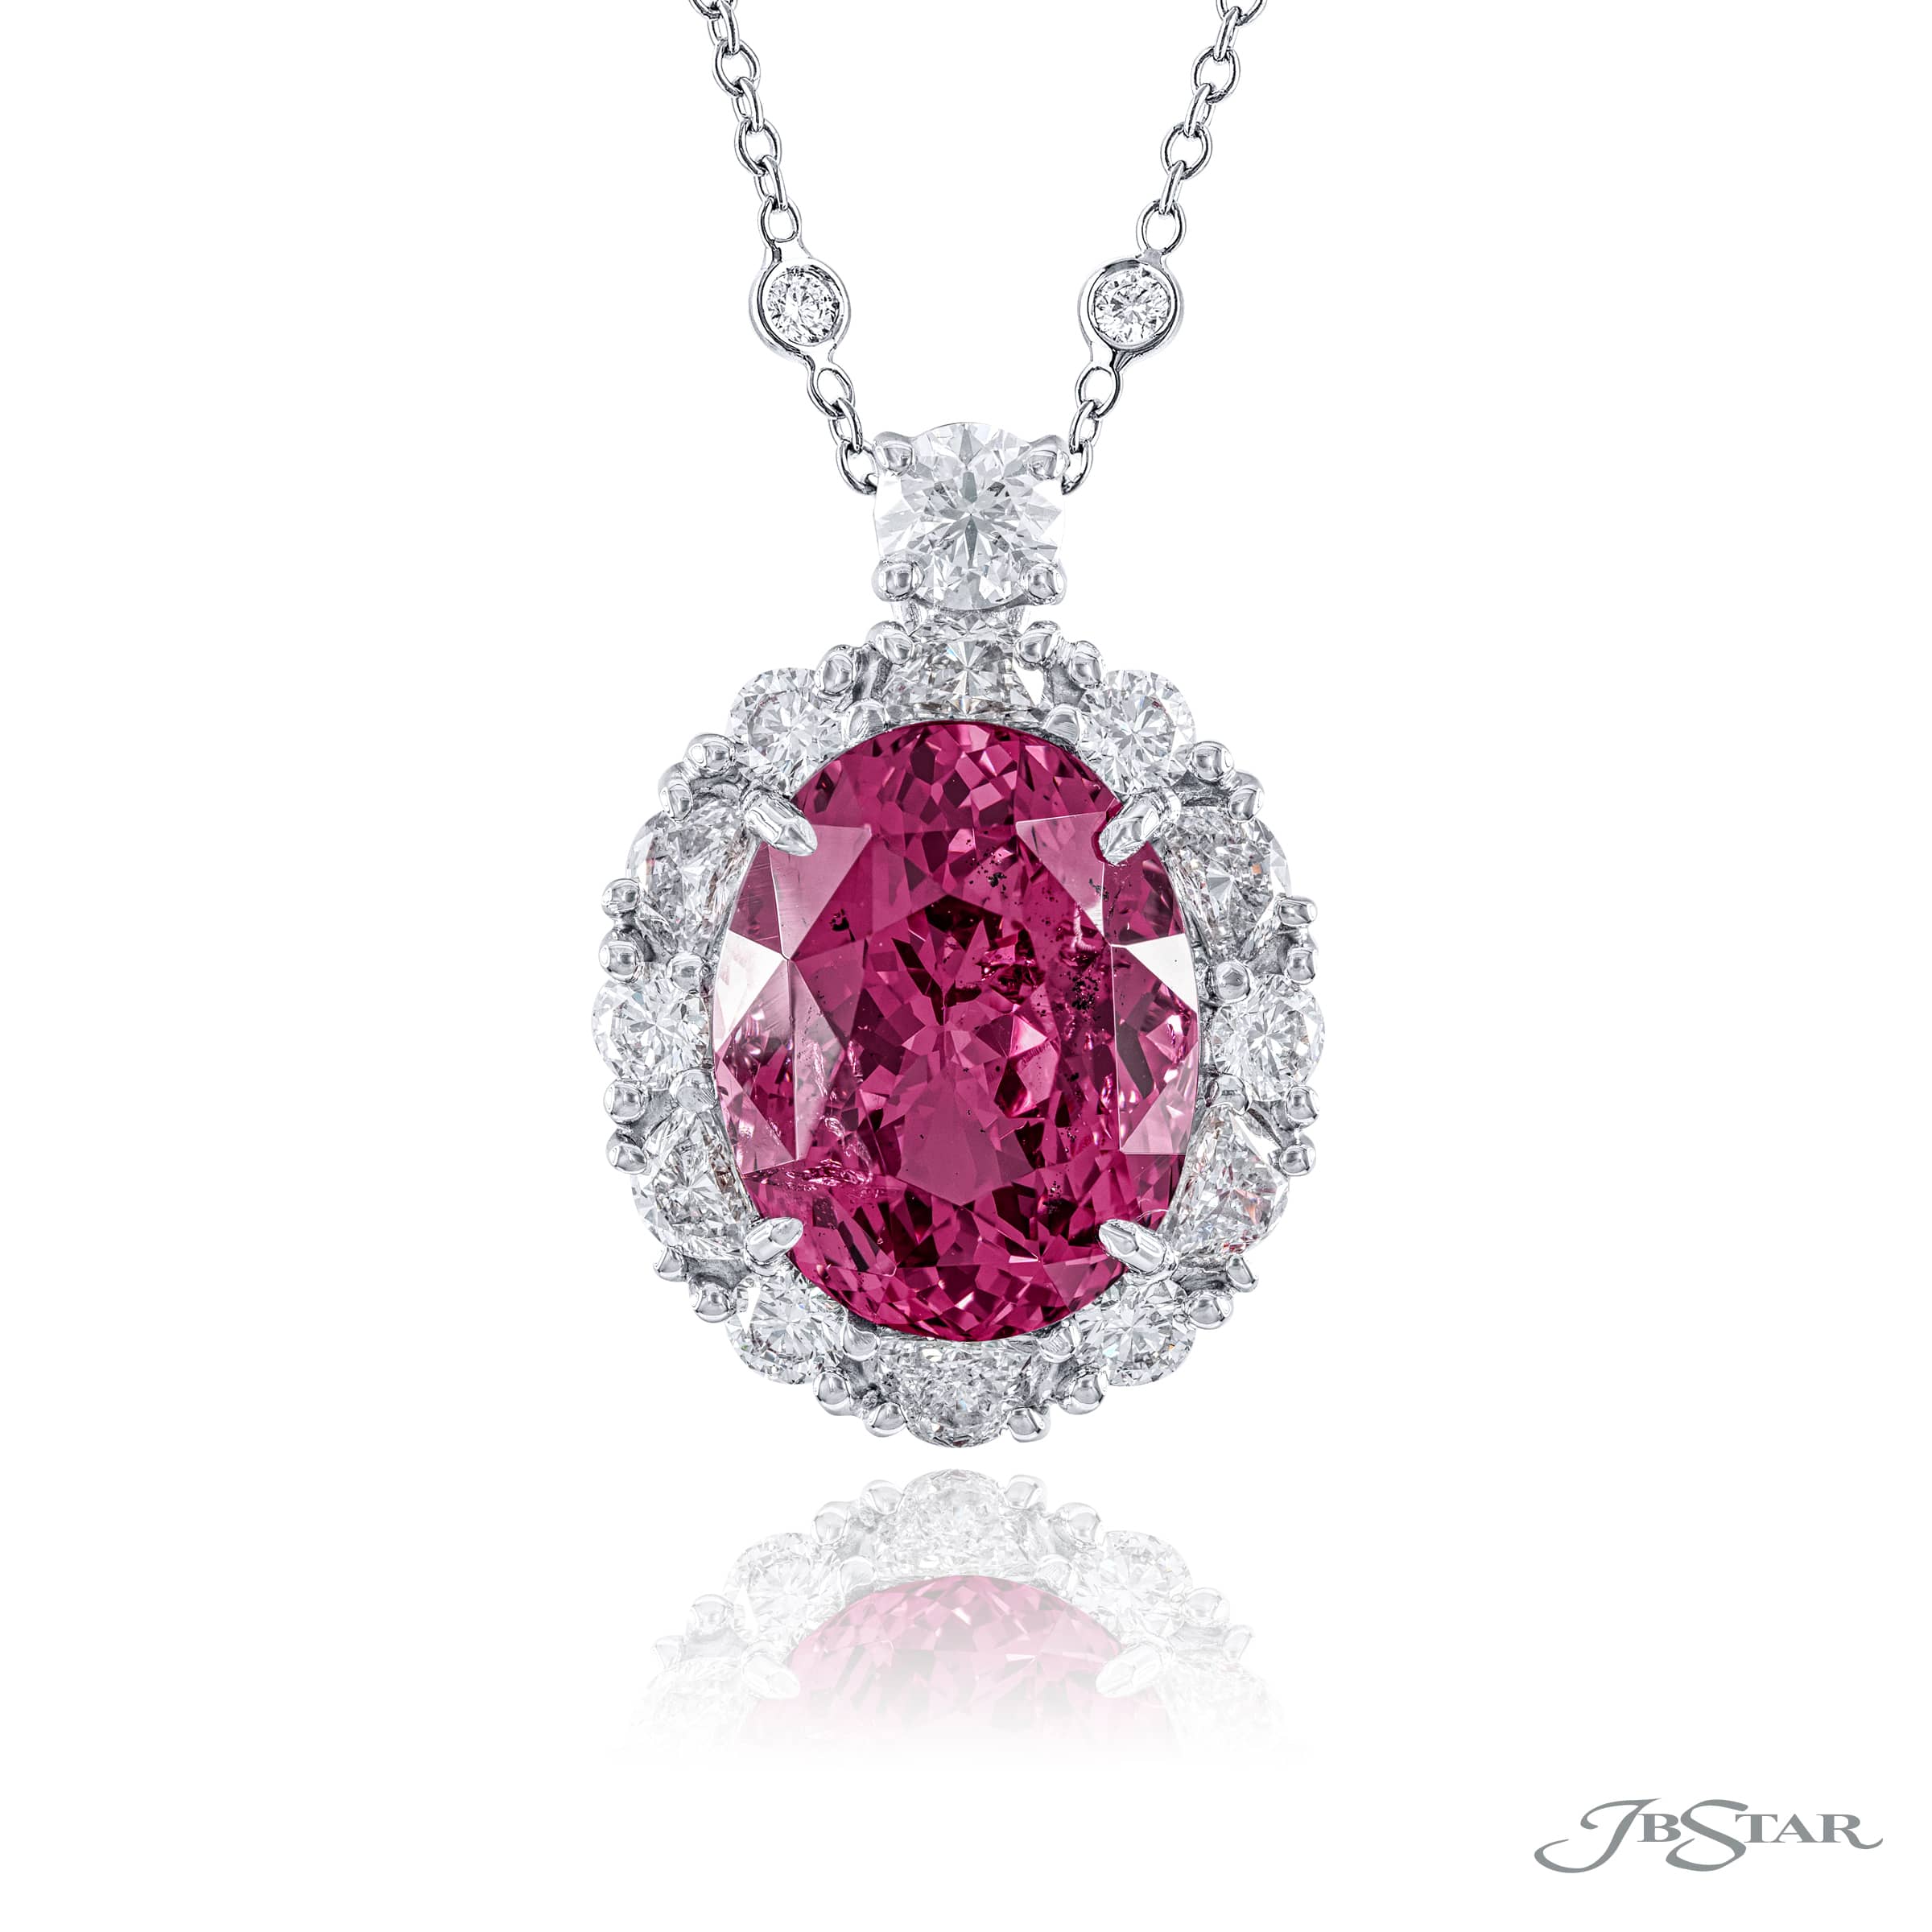 Pink spinel 7.55ct. oval and diamond pendant